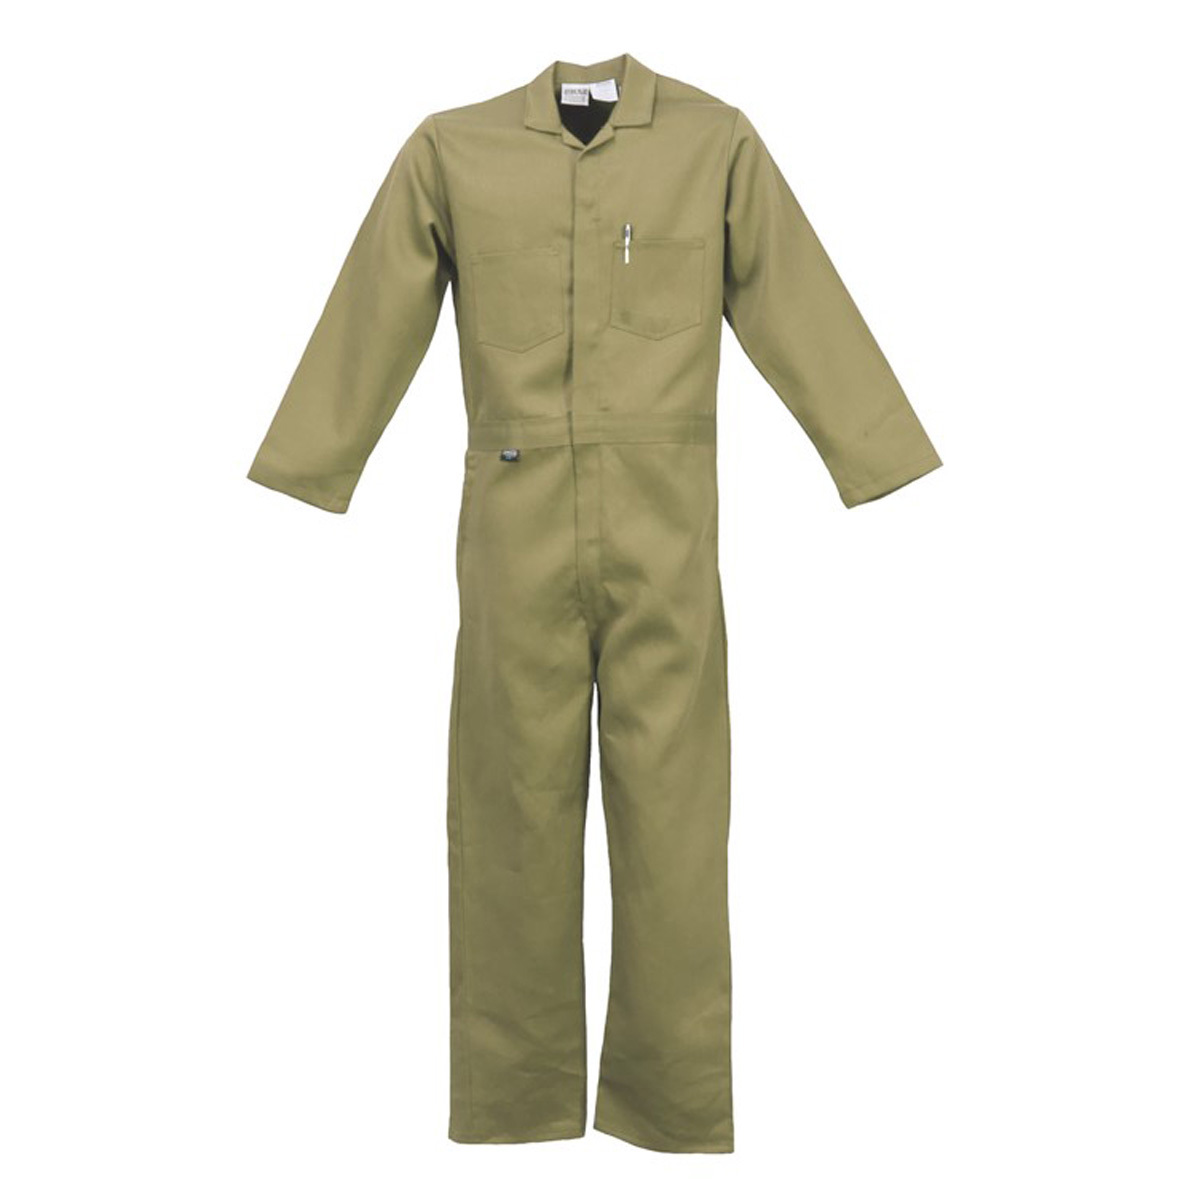 Stanco Safety Products™ Size 2X Short Tan Indura® Arc Rated Flame Resistant Coveralls With Front Zipper Closure